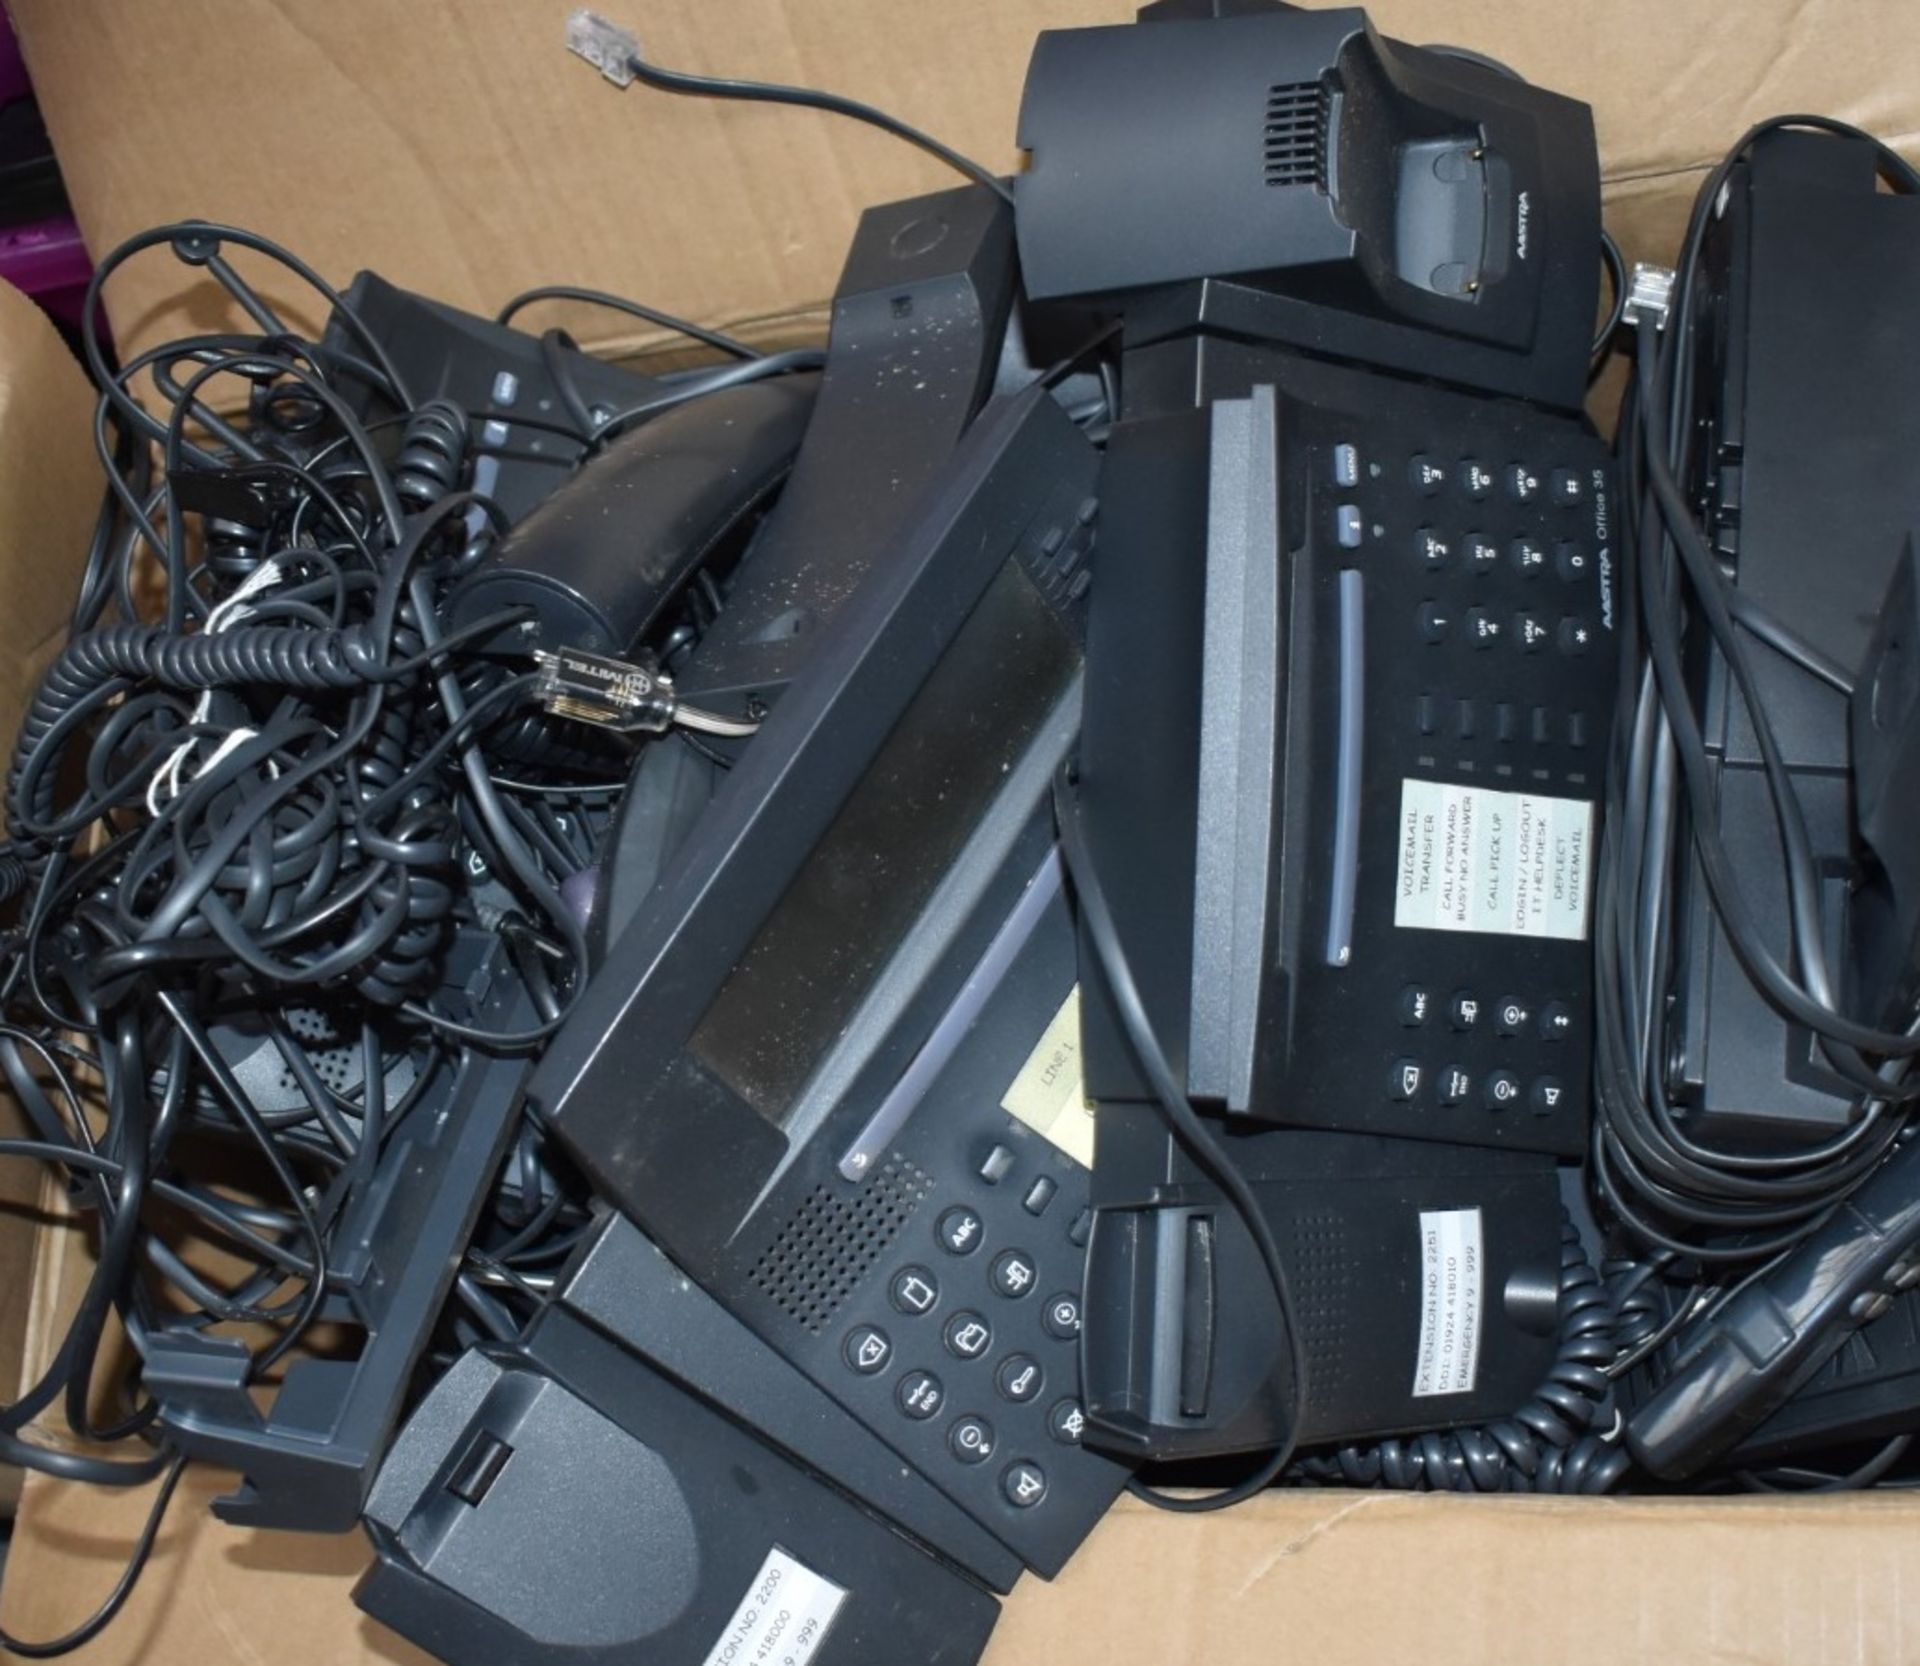 22 x Astra Office Telephones - Various Models Included - Removed From a Working Office Environment - Image 6 of 7